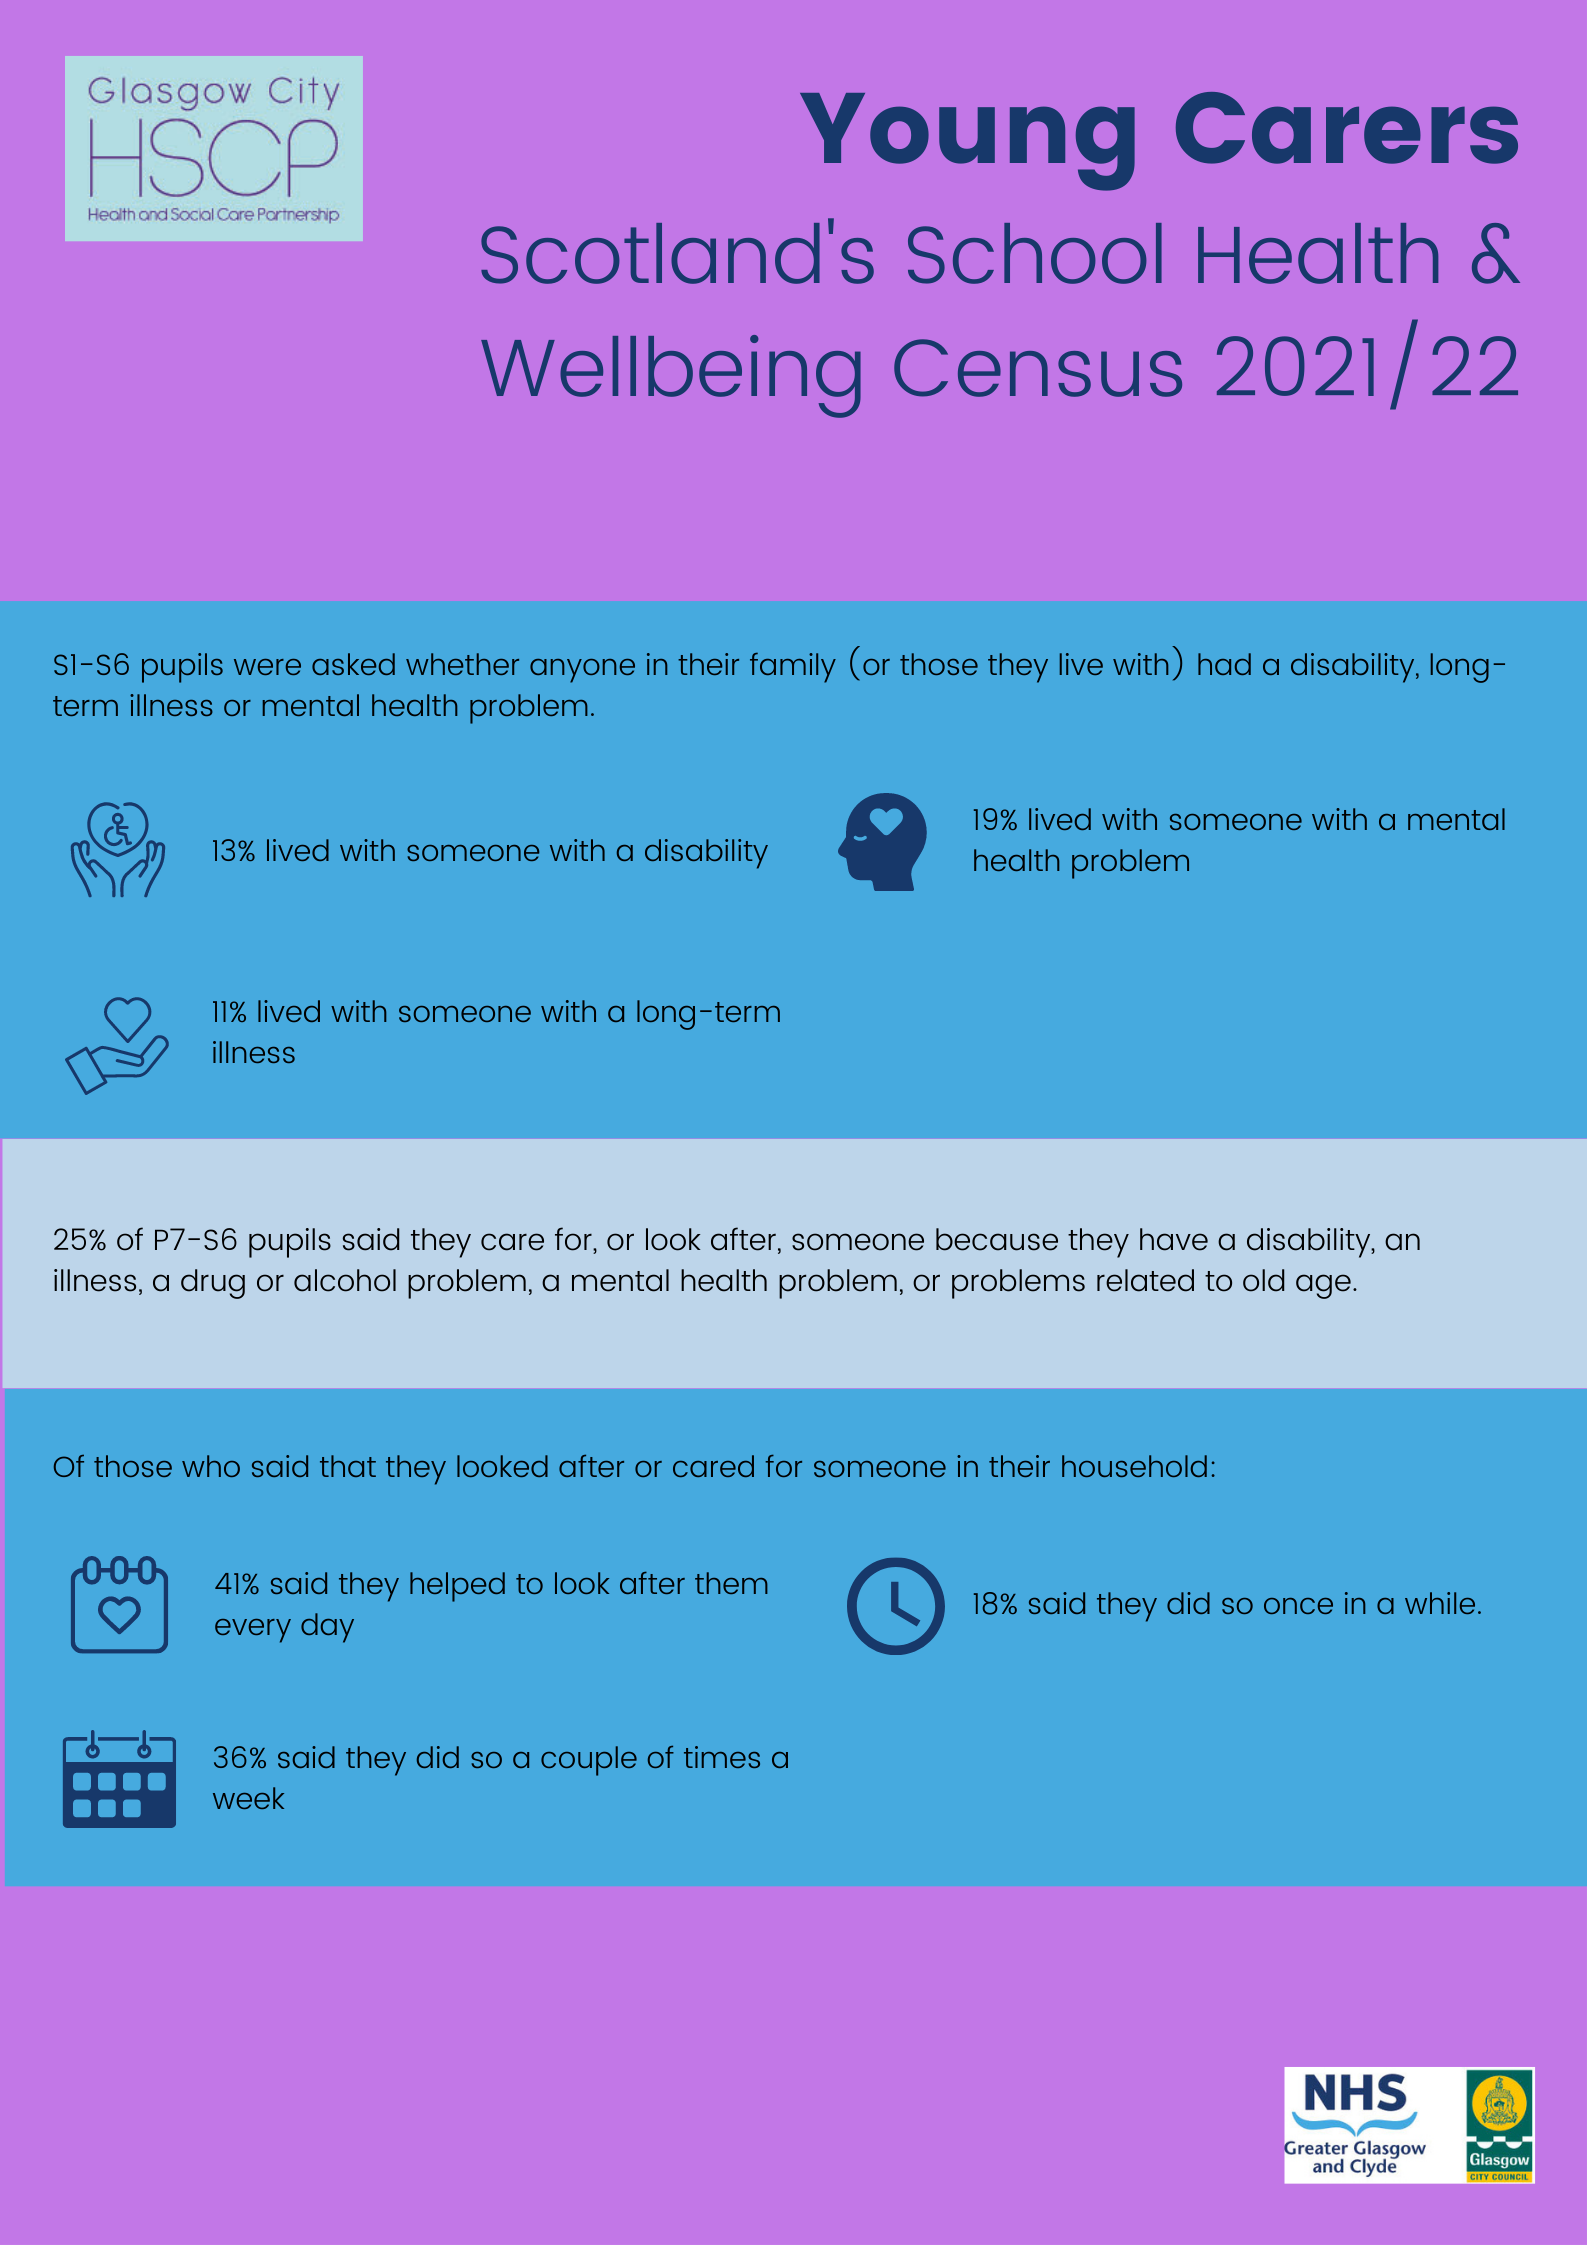 Glasgow City HSCP Infographic highlighting data on young carers from Scotland's School Health and Wellbeing Census 2021/22